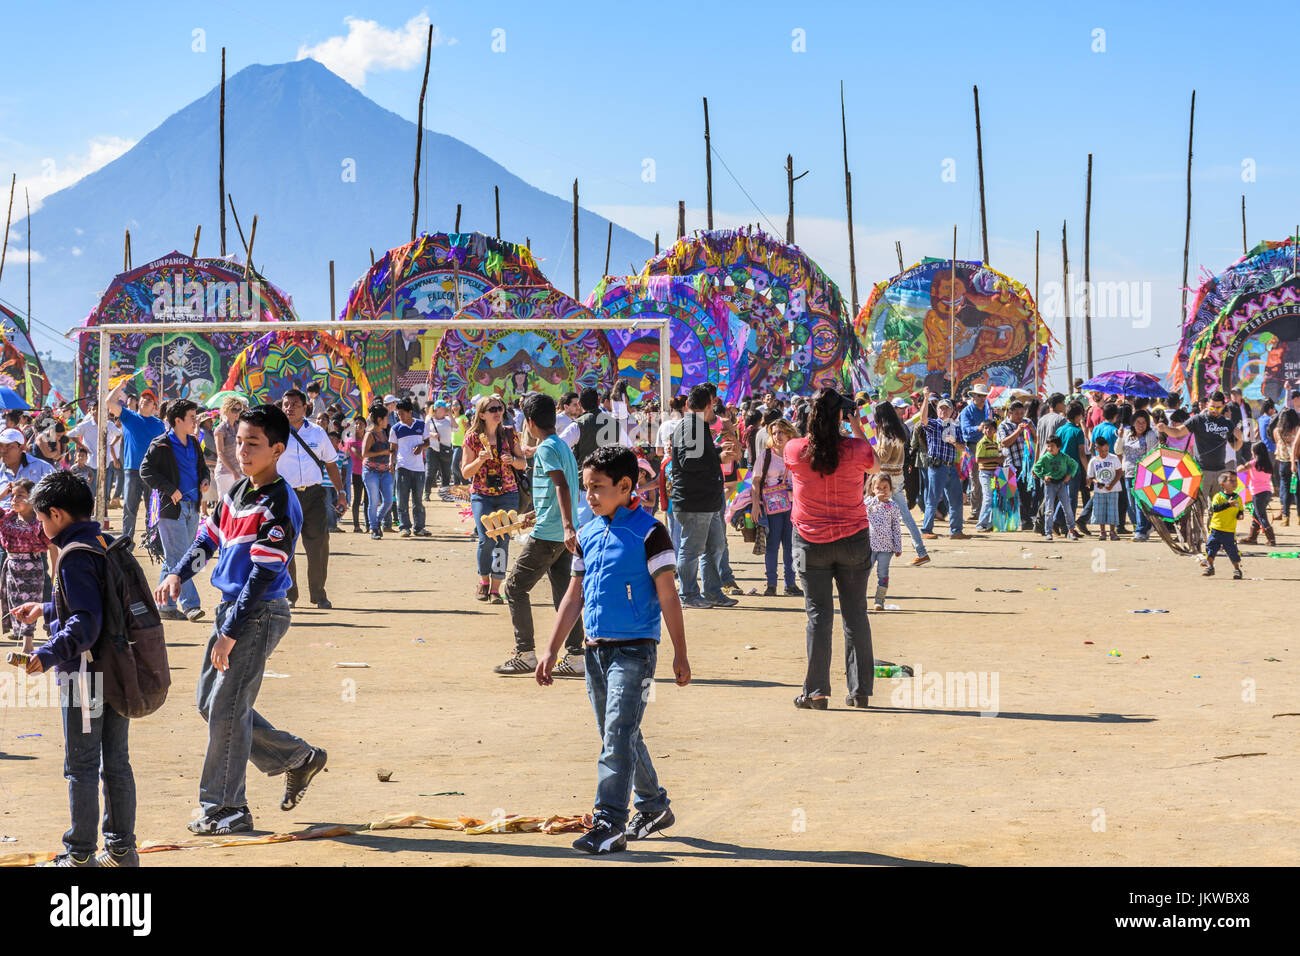 Sumpango, Guatemala - November 1, 2015: Visitors at giant kite festival  on All Saints' Day or Day of the Dead. Agua volcano behind. Stock Photo